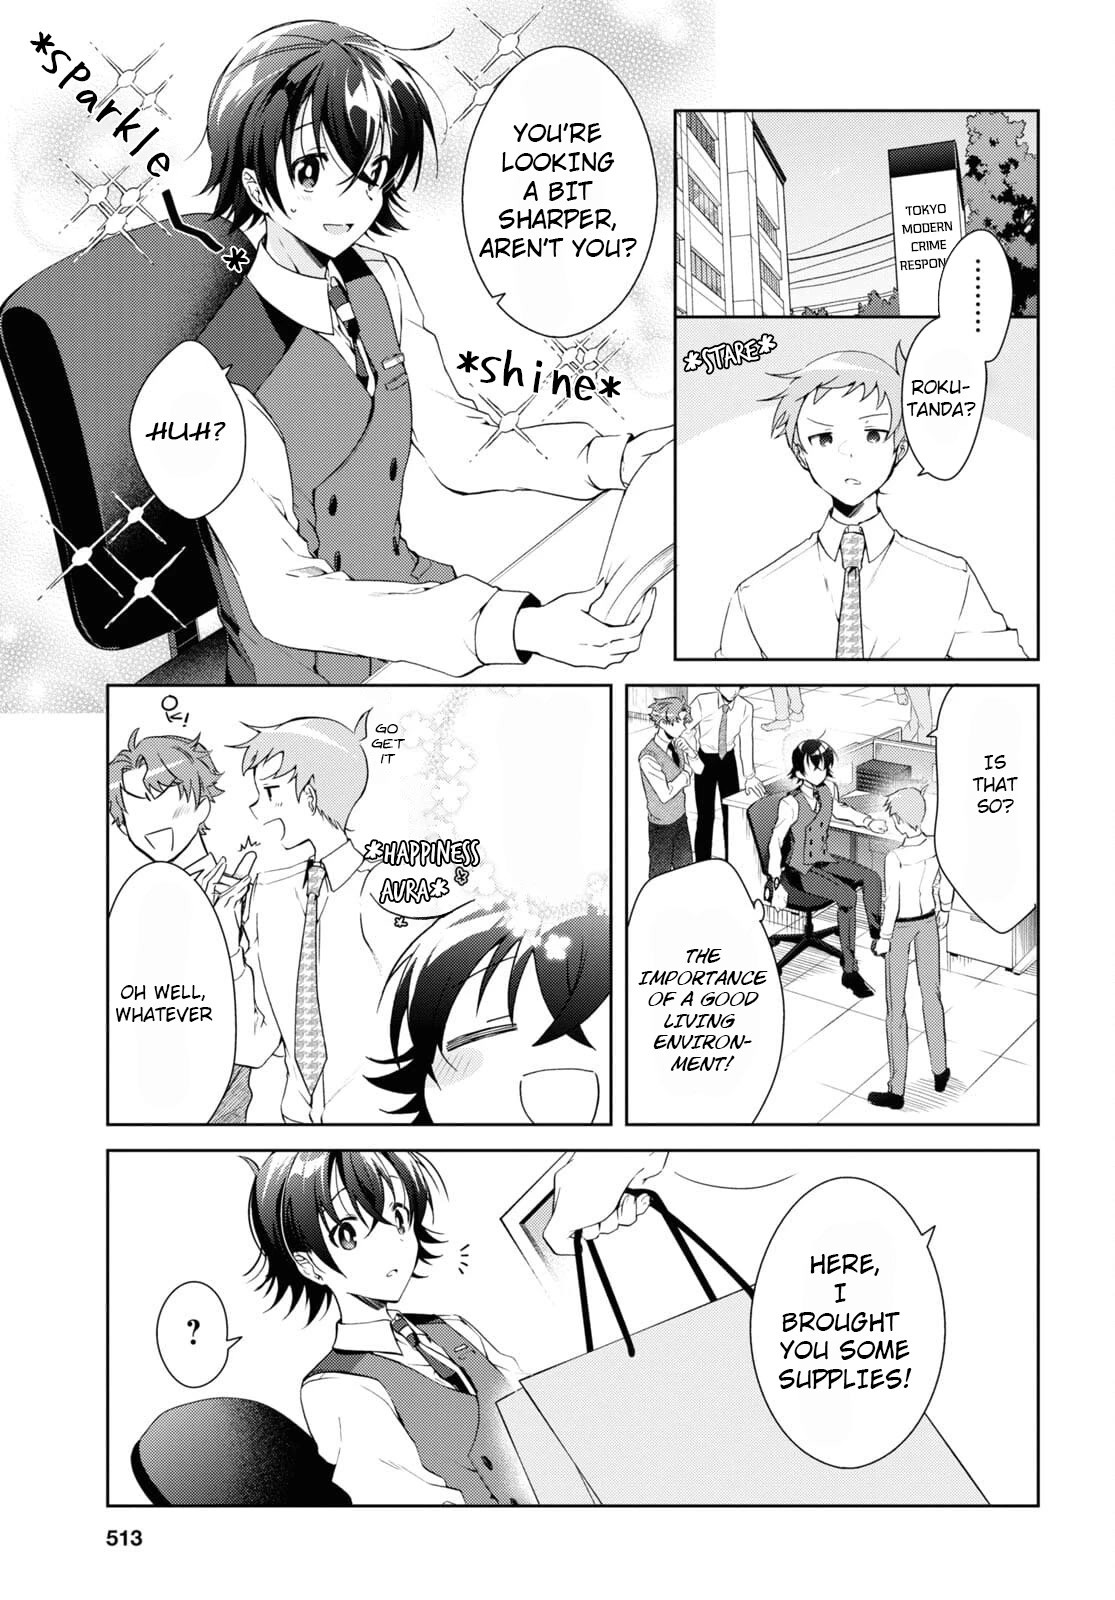 Isshiki-san Wants to Know About Love. - chapter 14 - #5